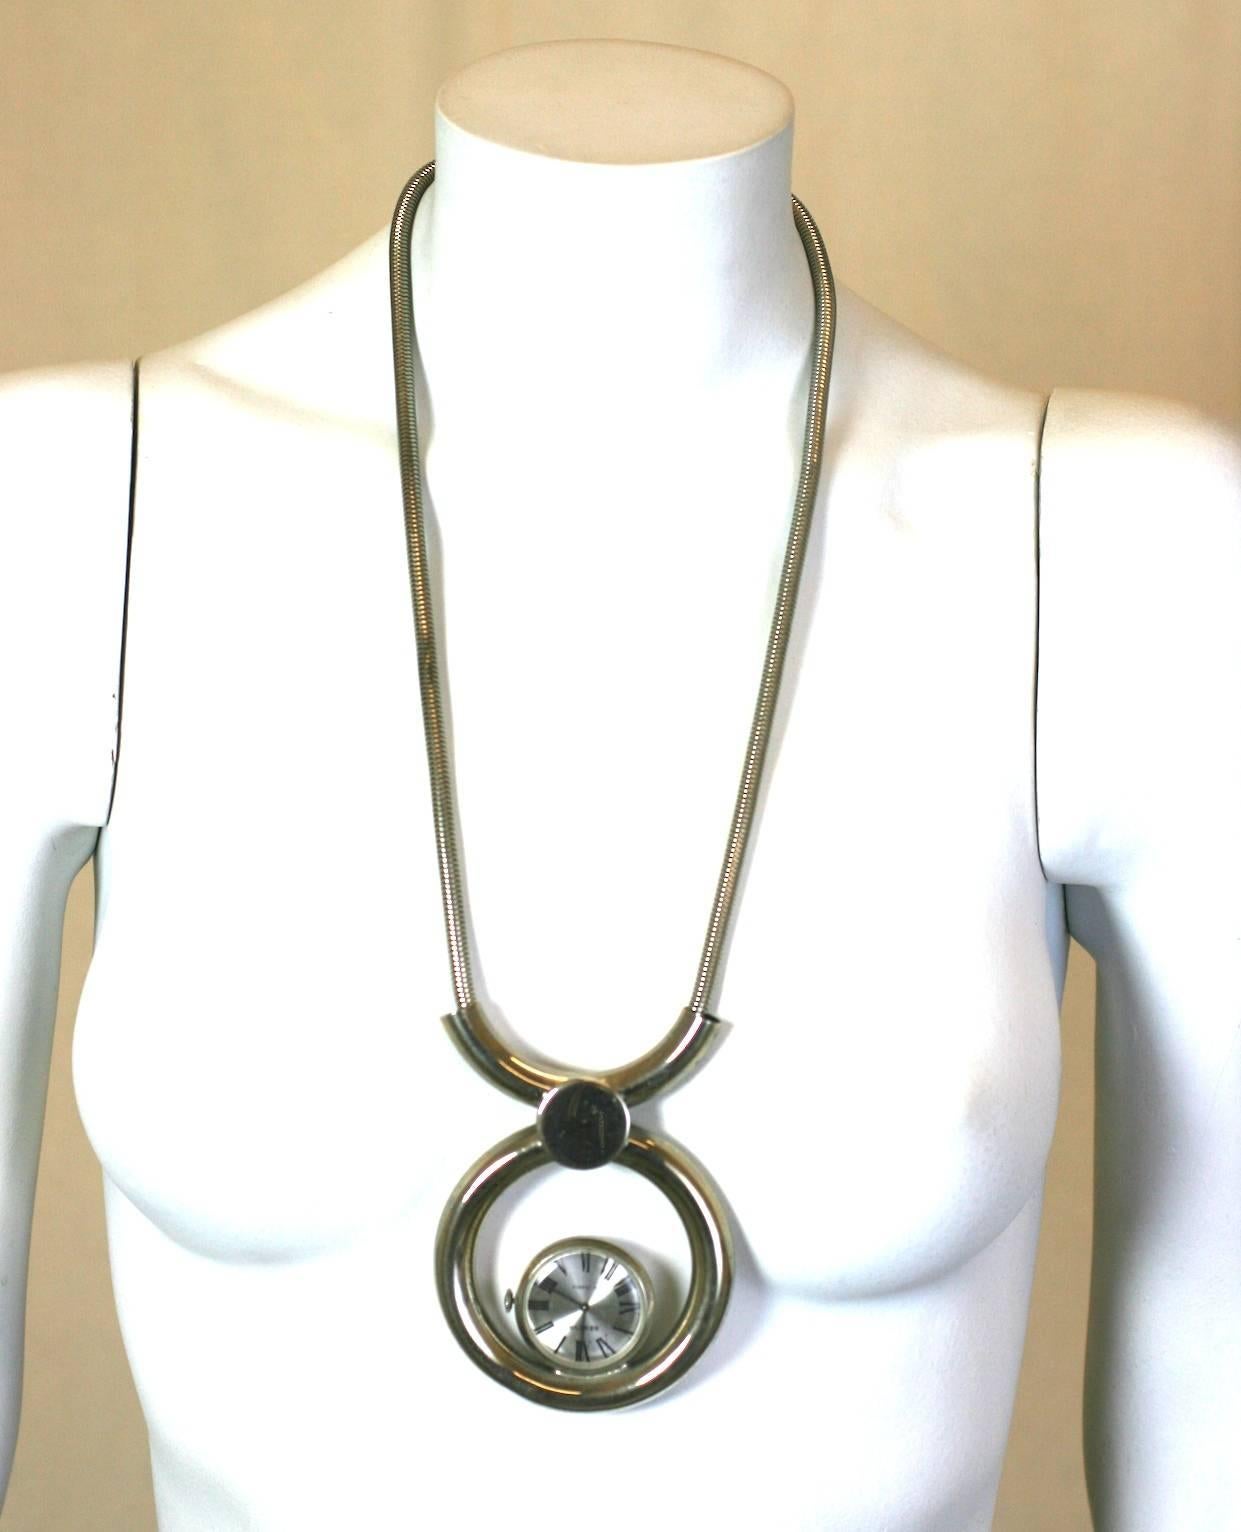 Mod Chrome Swiss Pendant Watch Necklace In Excellent Condition For Sale In New York, NY